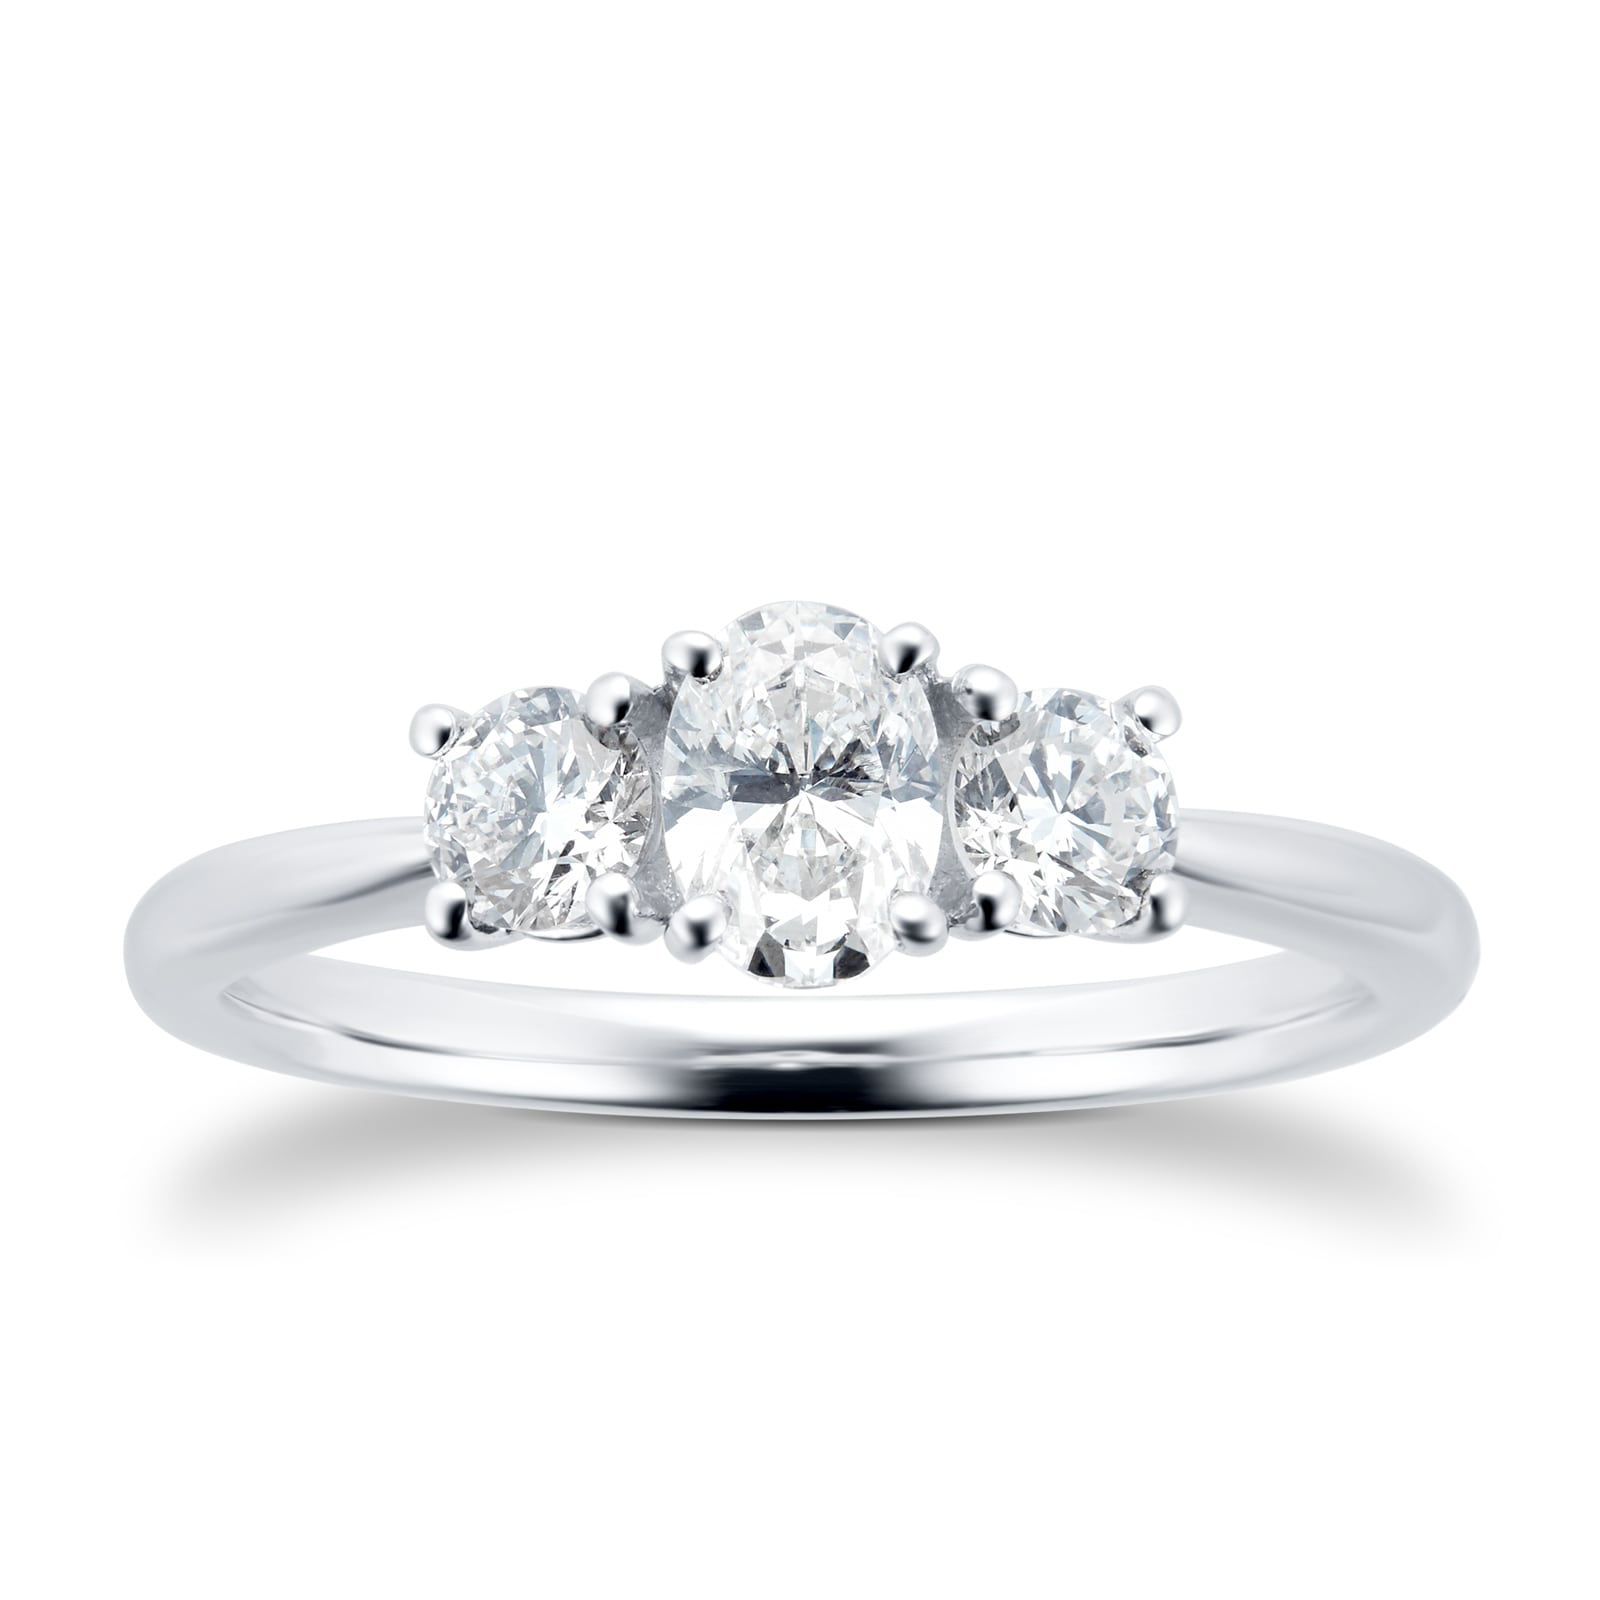 Platinum 0.76cttw Diamond Thee Stone Oval & Brilliant Cut Engagement Ring - Ring Size M